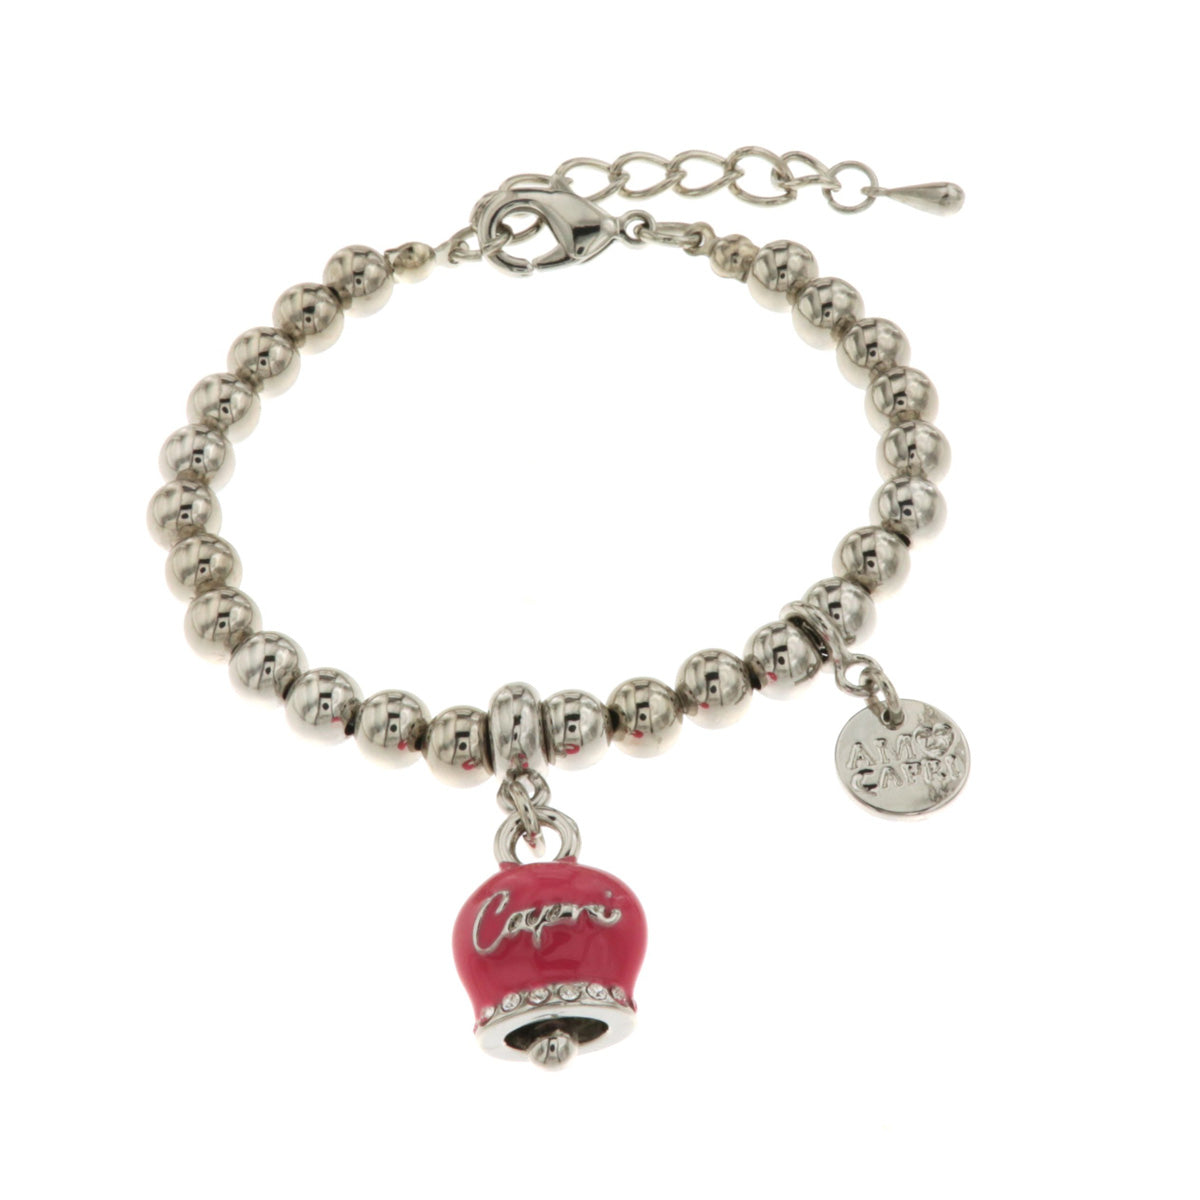 Metal bracelet with fuchsia bell, with Capri writing and white crystals